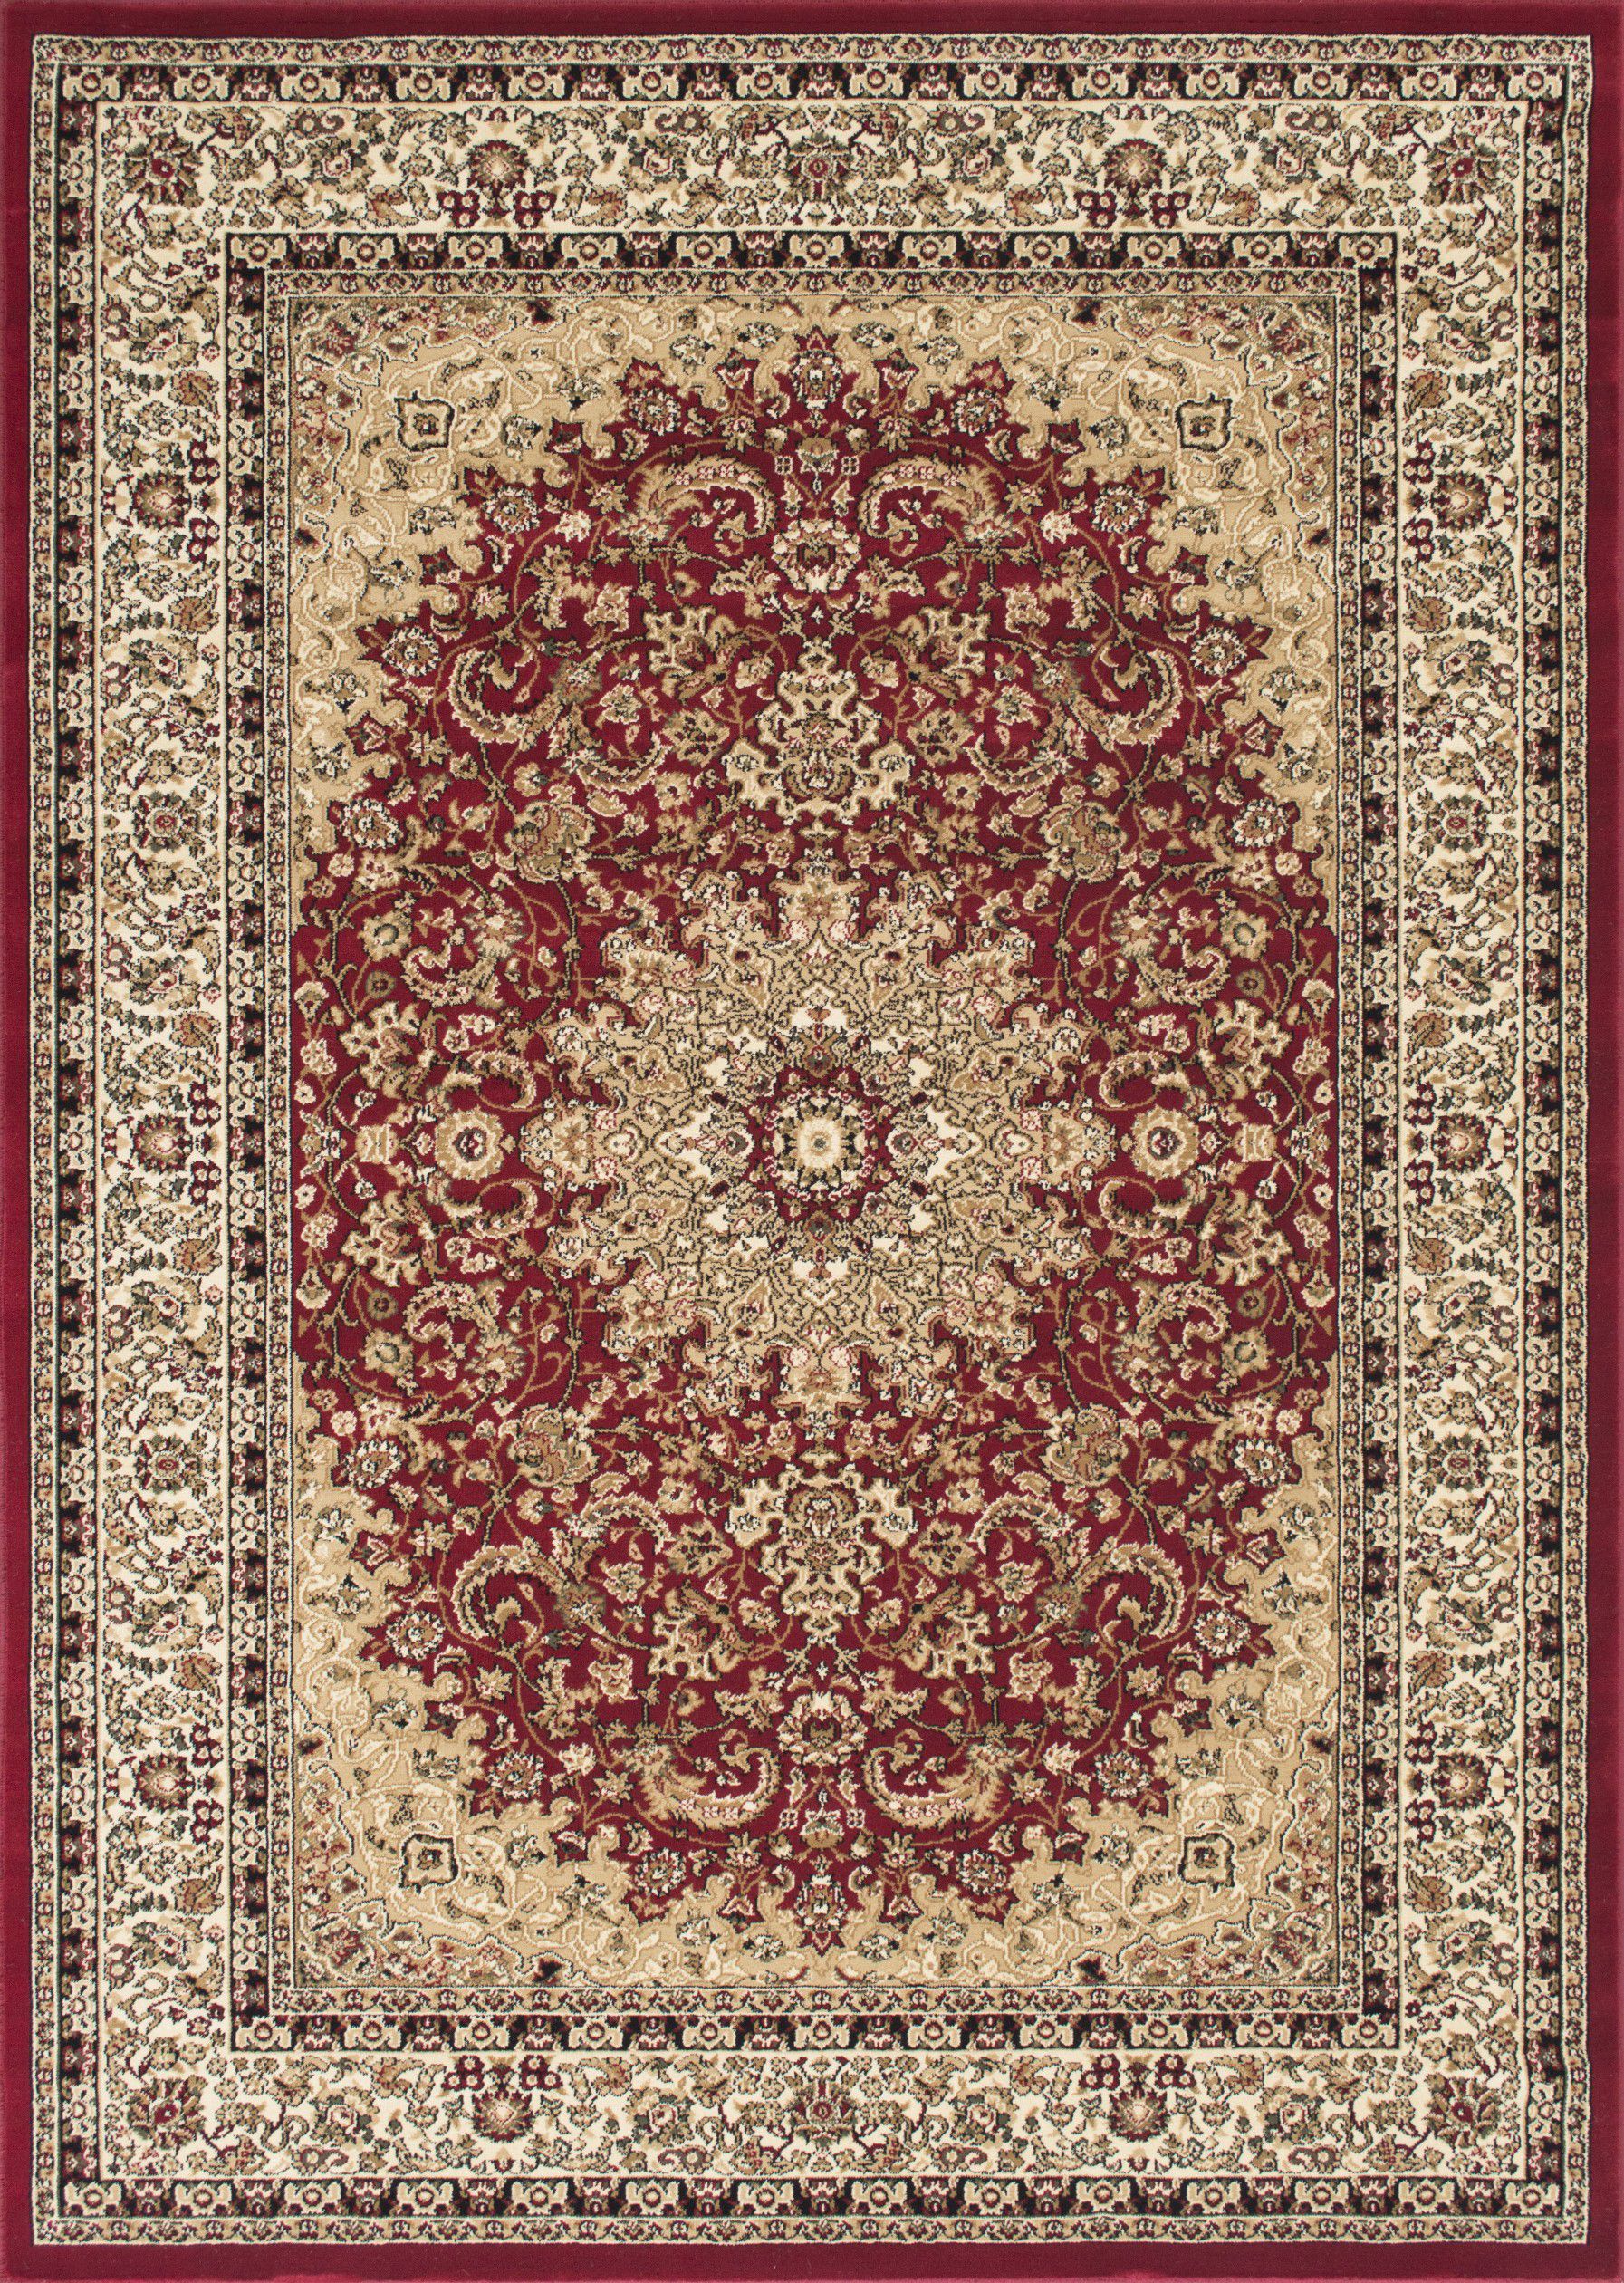 New Top Quality Persian Design Rug 8x10